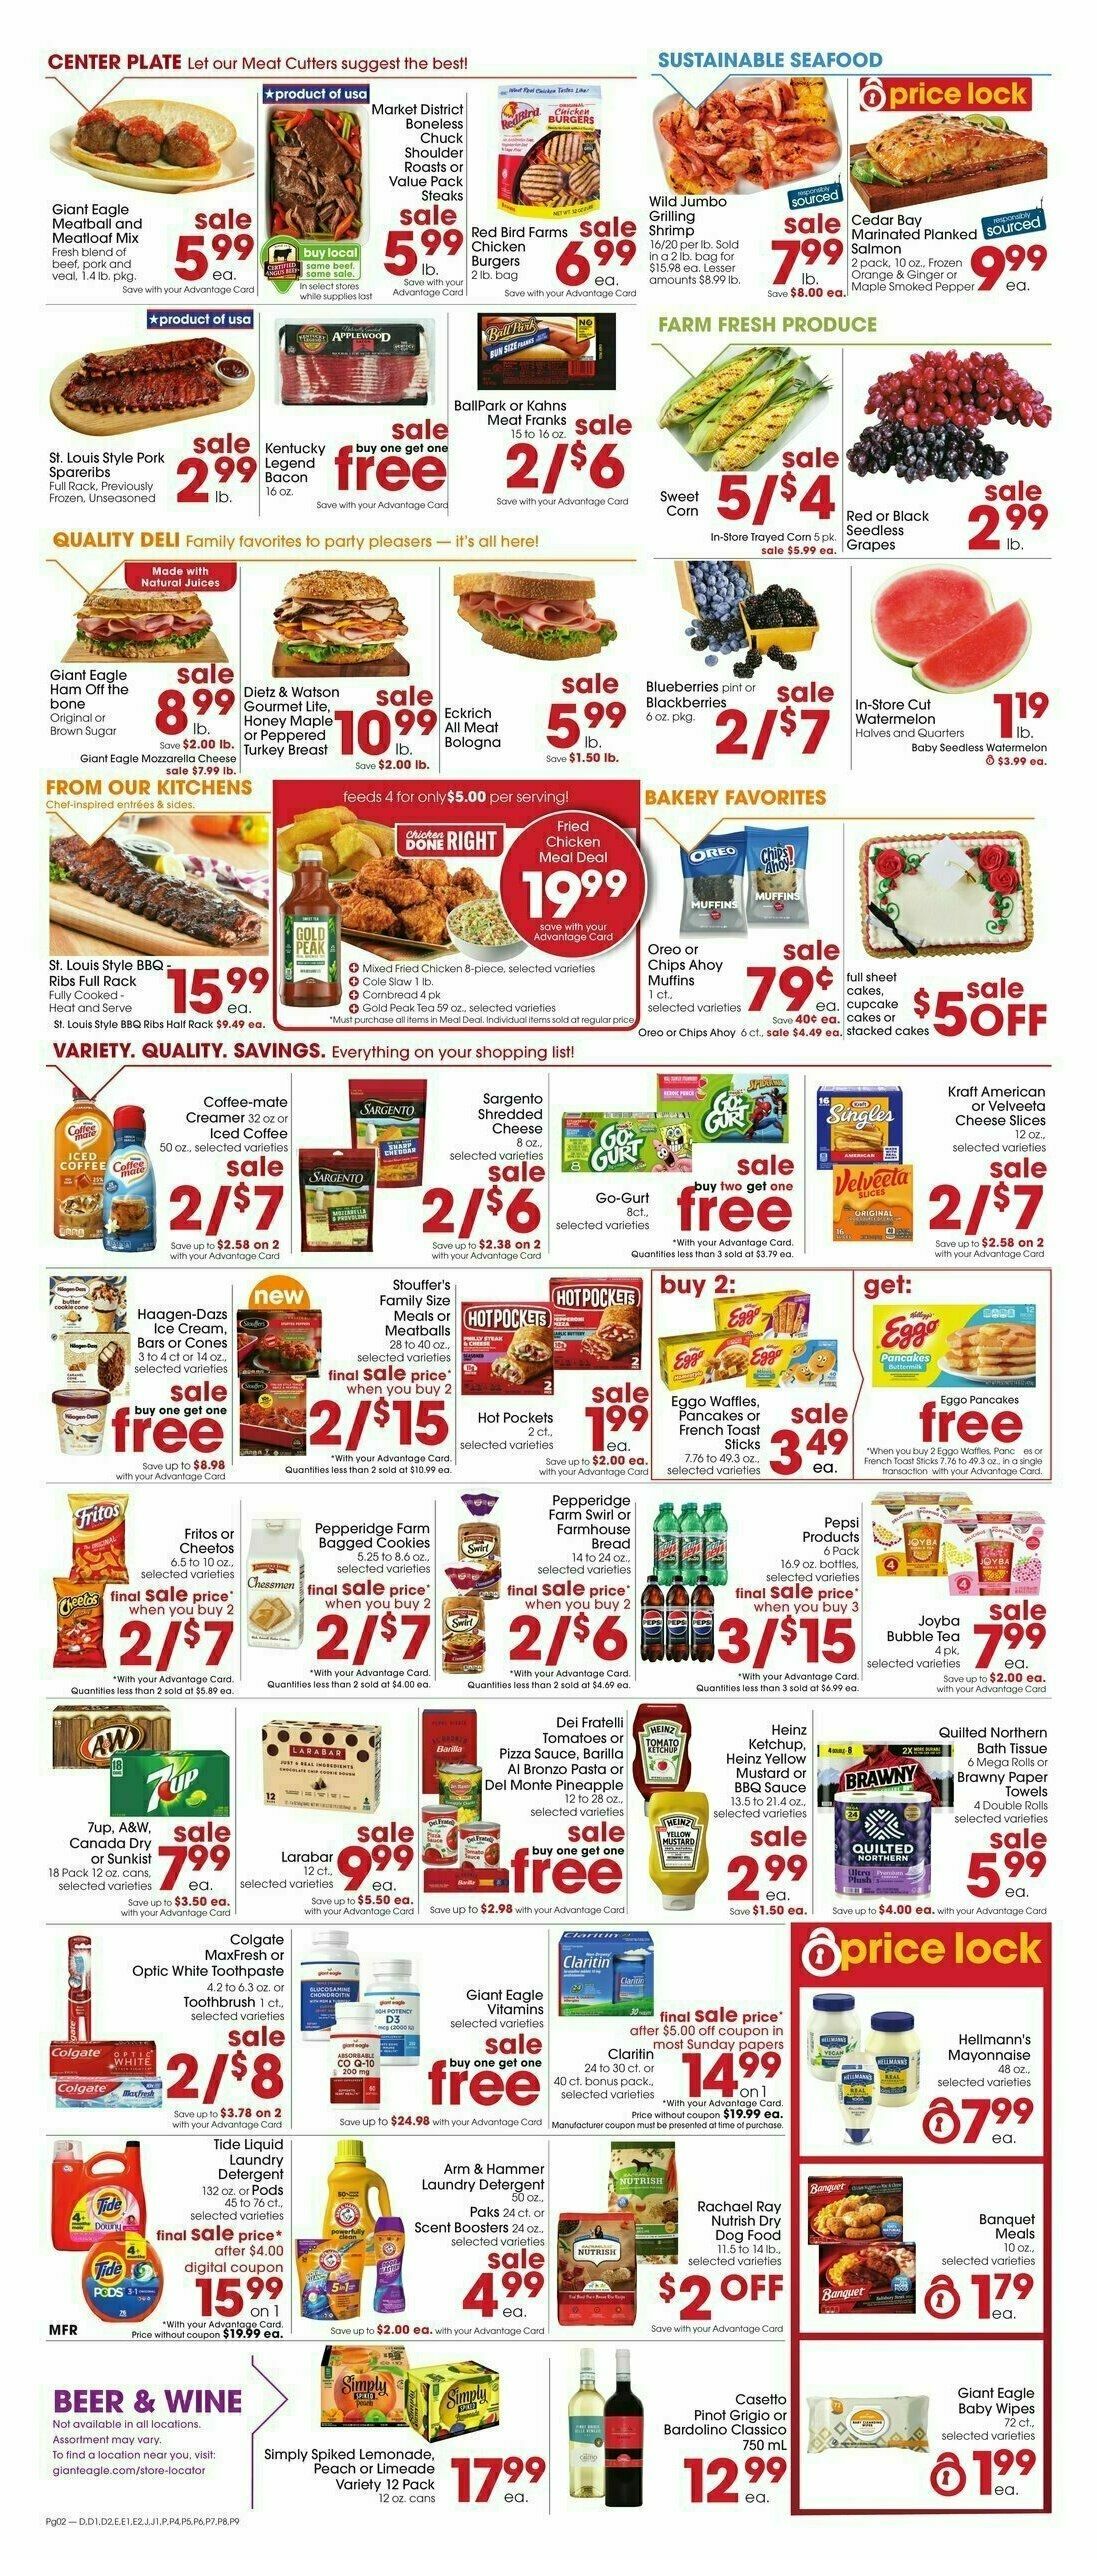 Giant Eagle Weekly Ad from April 25